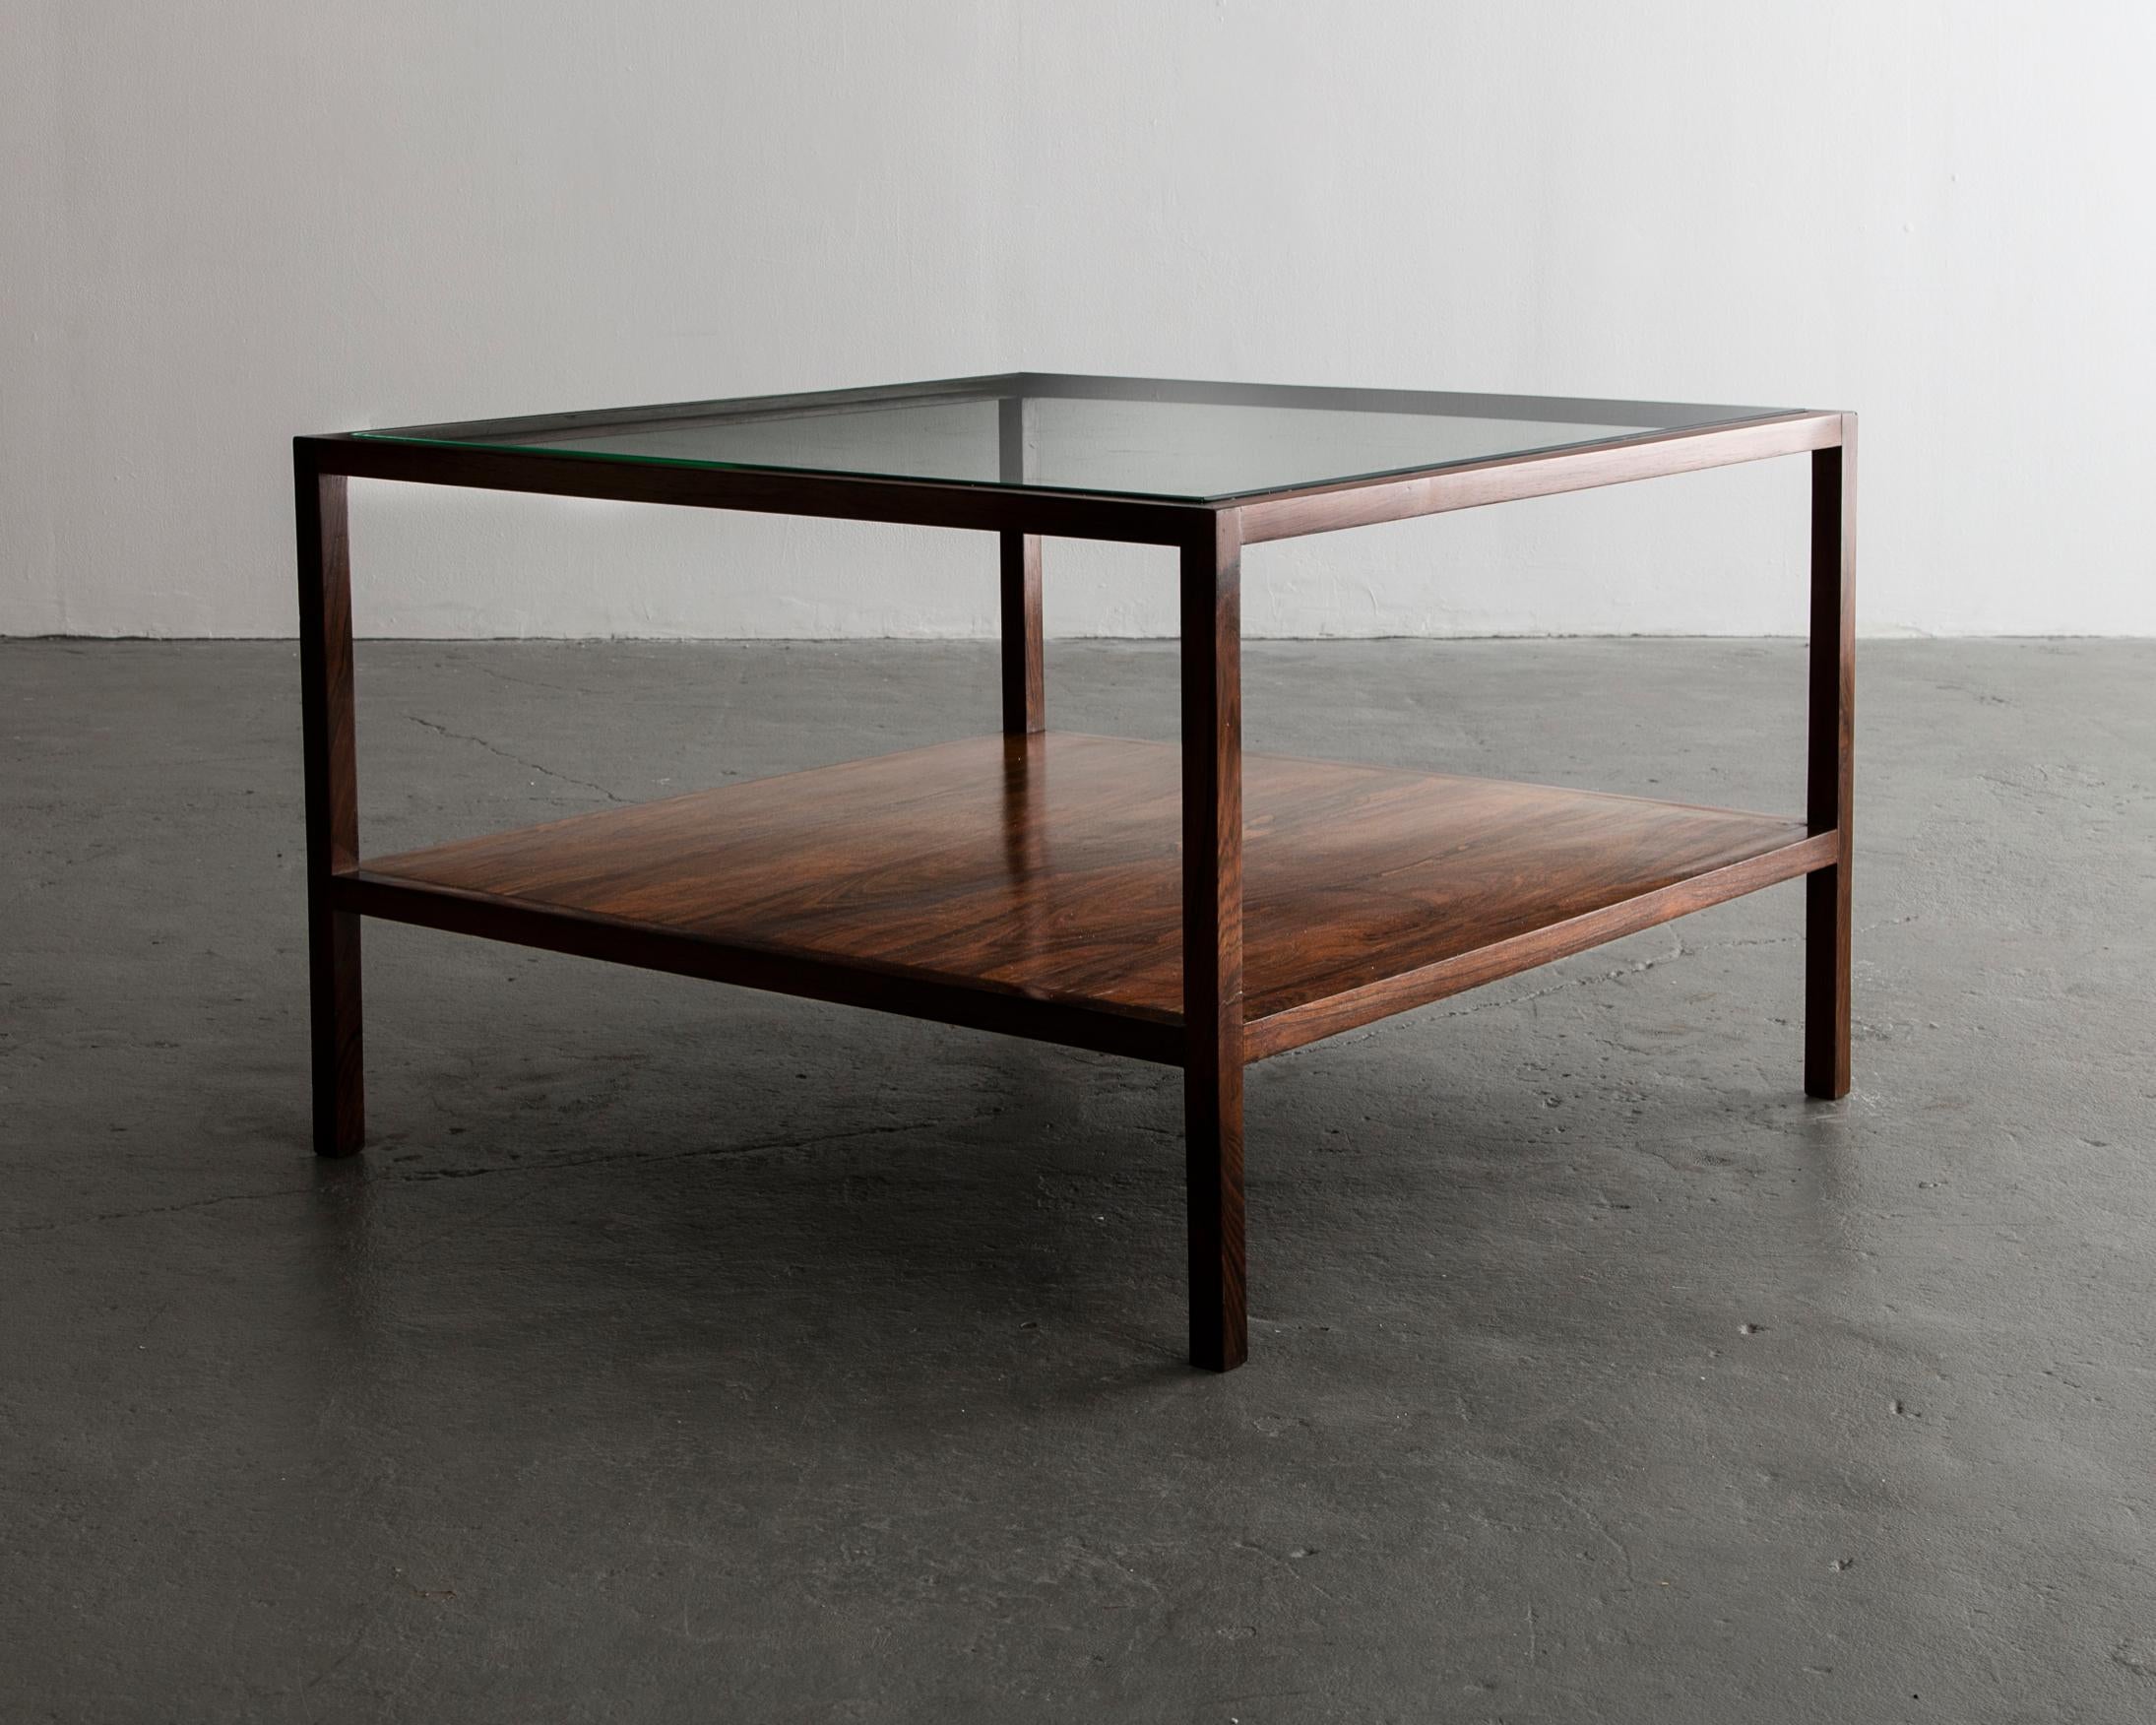 Square coffee table in jacaranda with glass top and shelf underneath. Designed by Joaquim Tenreiro, Brazil, 1954.